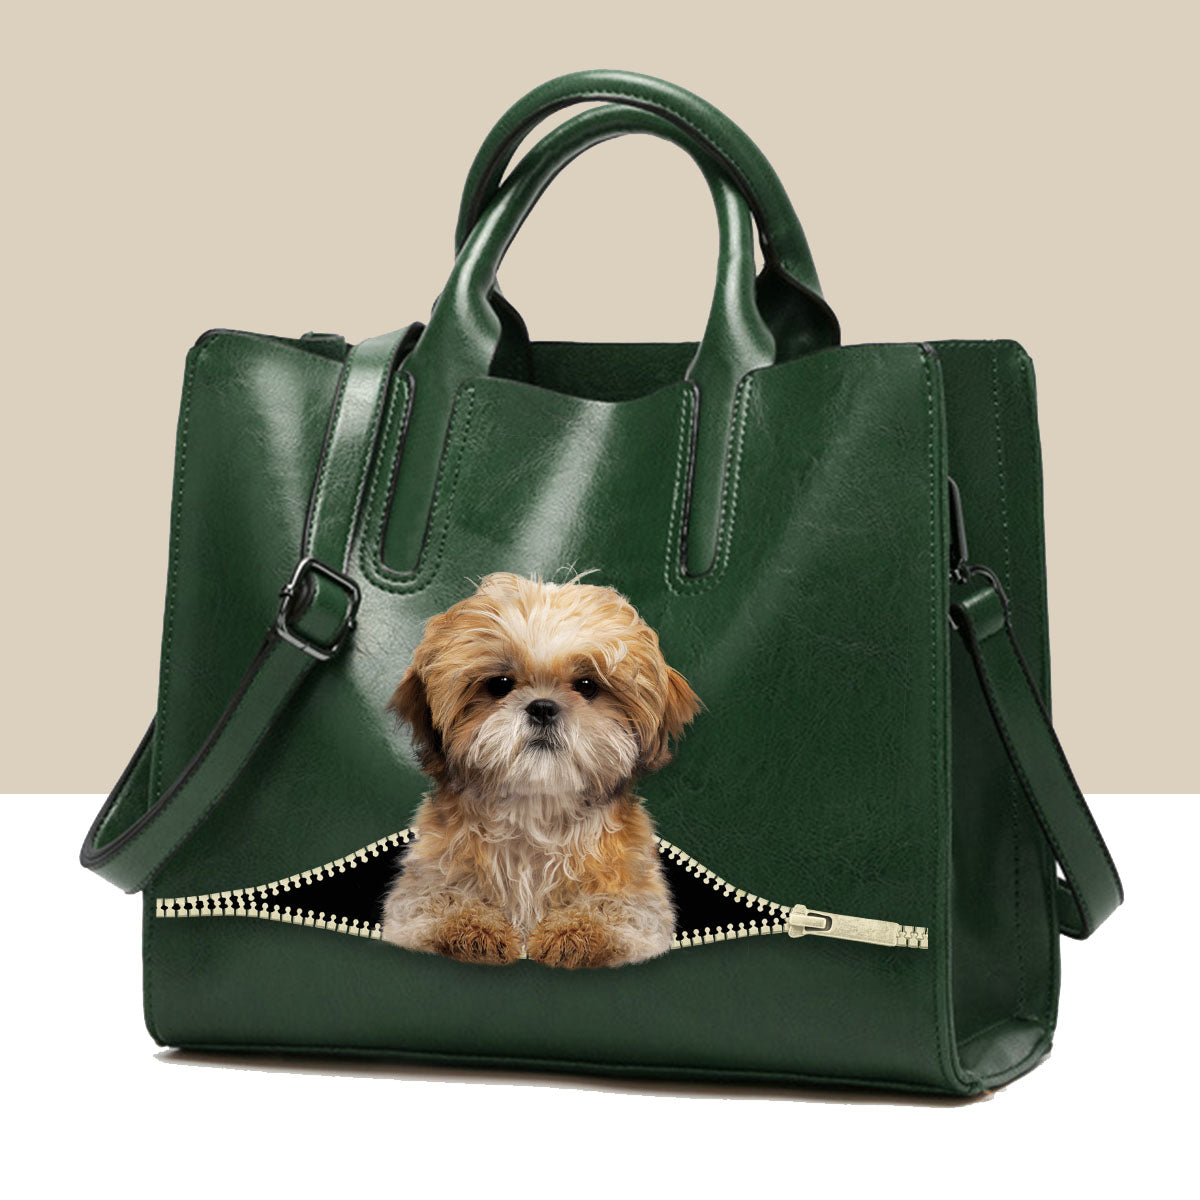 Chill Out Time With Shih Tzu - Luxury Handbag V1